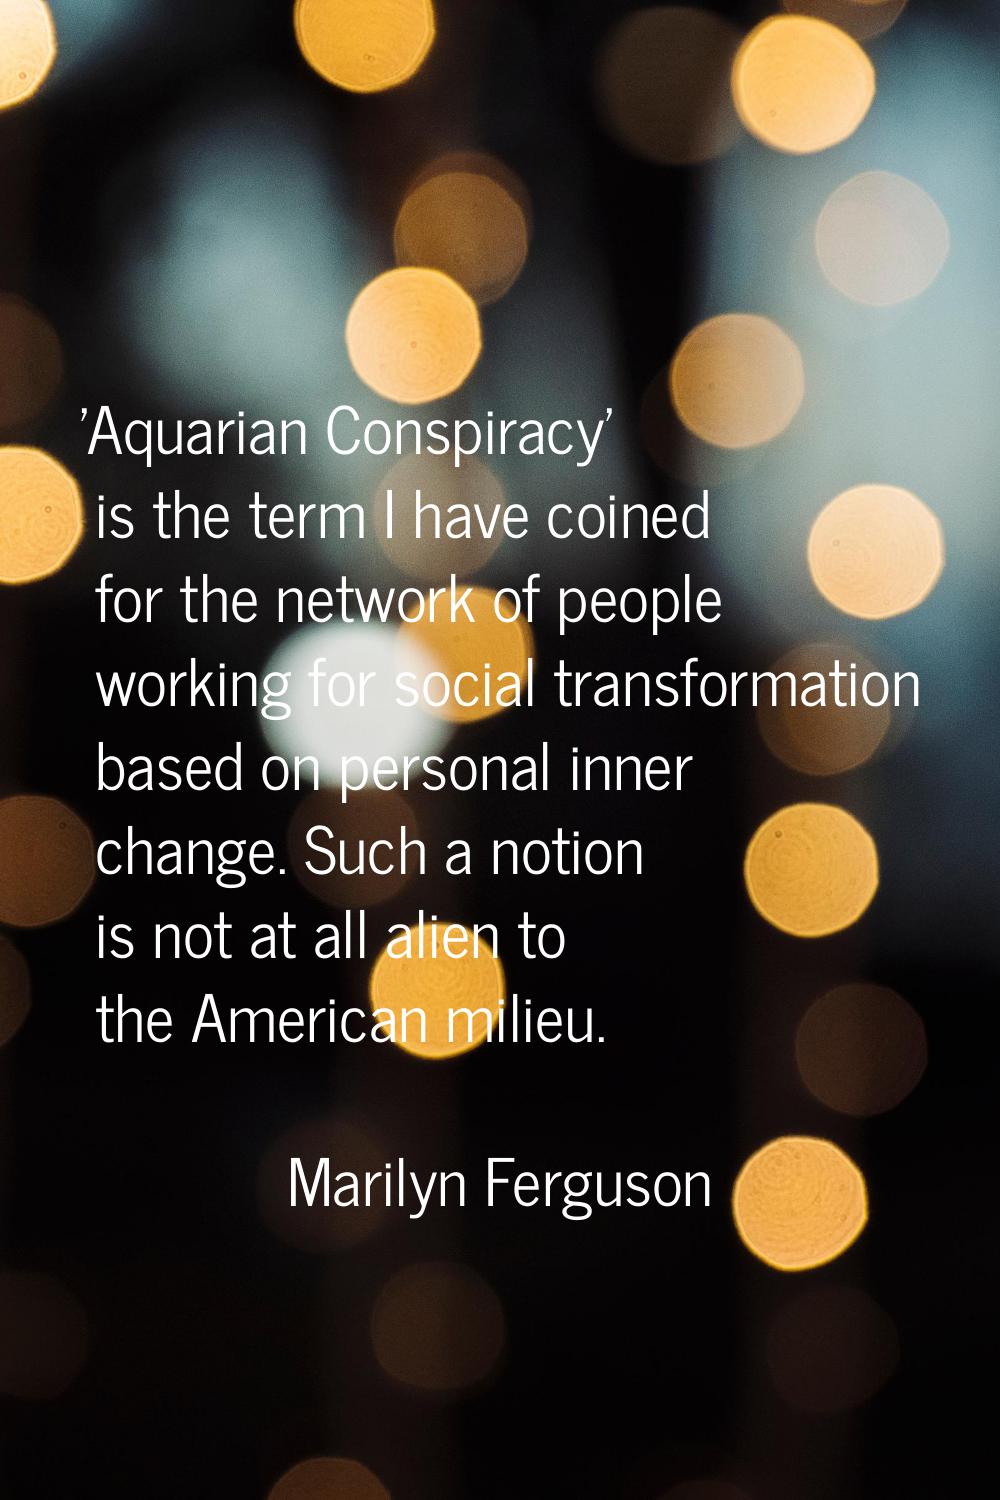 'Aquarian Conspiracy' is the term I have coined for the network of people working for social transf